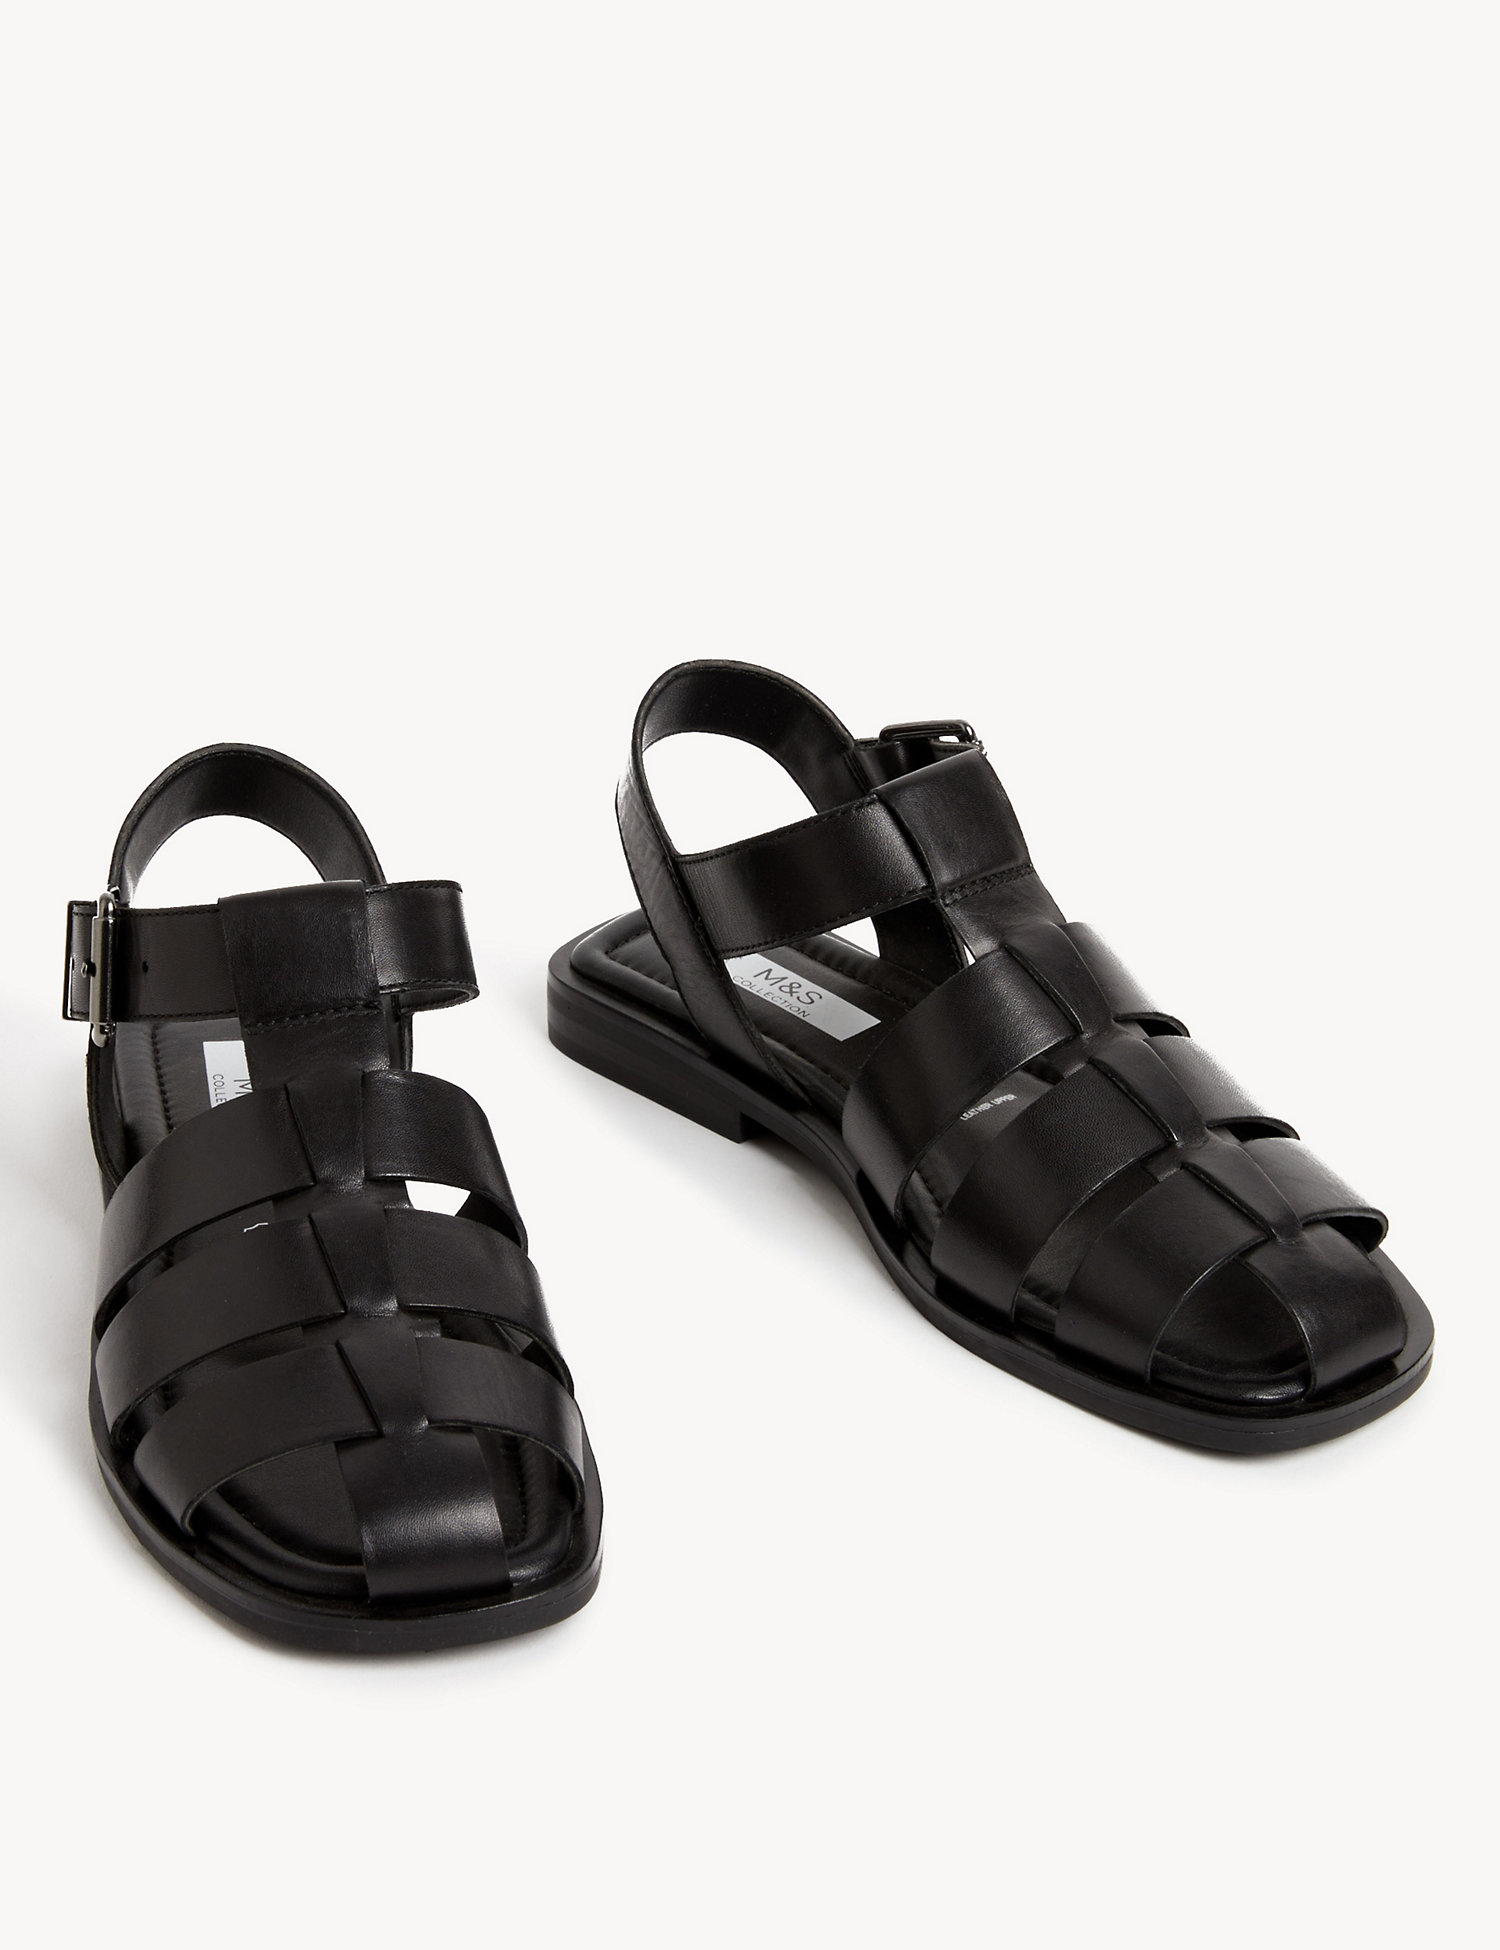 14 of the Best Pairs of Caged & Fisherman Sandals For 2023